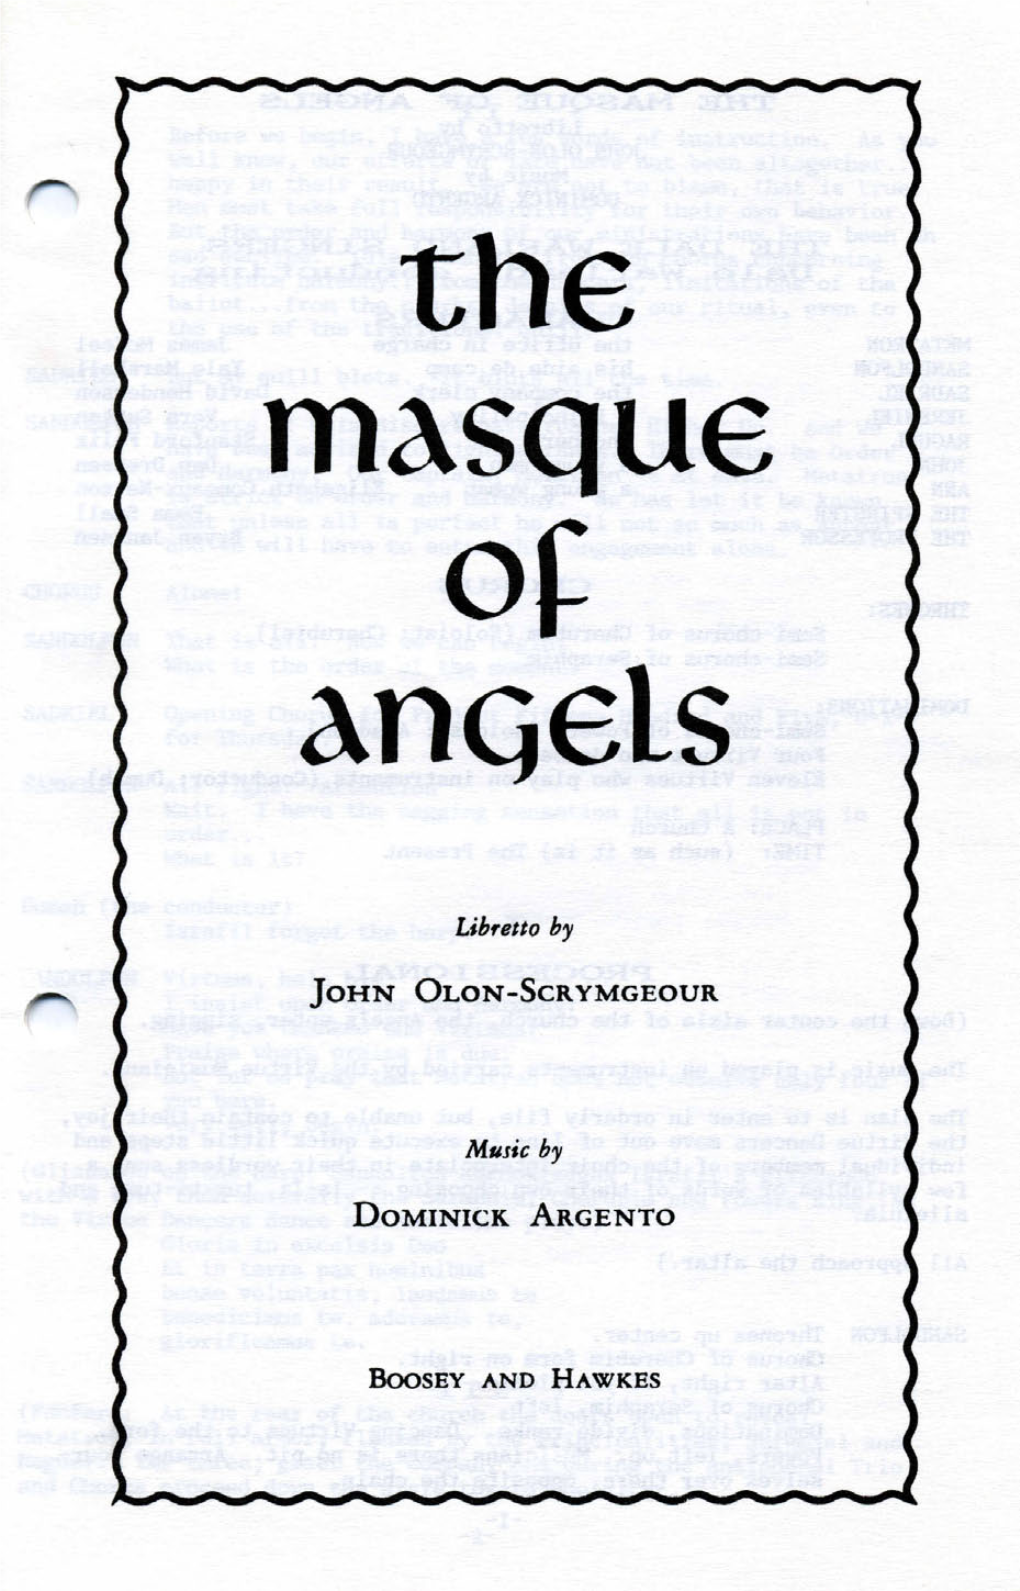 The Masque of Angels, November 2, 1987, Ordway Music Theatre